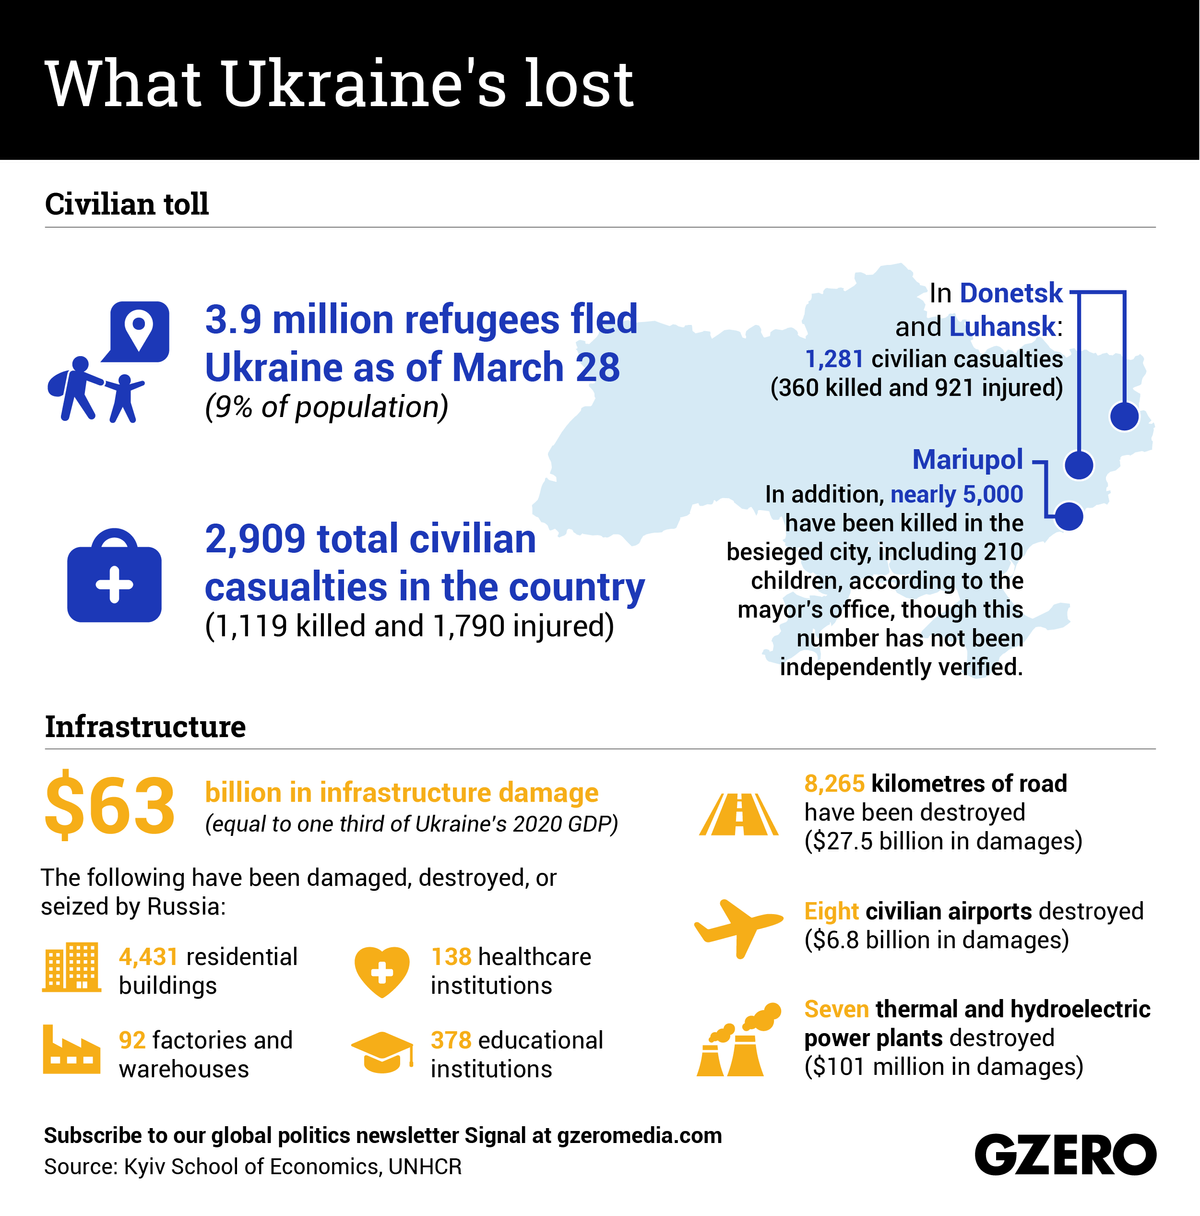 The Graphic Truth: What Ukraine's lost